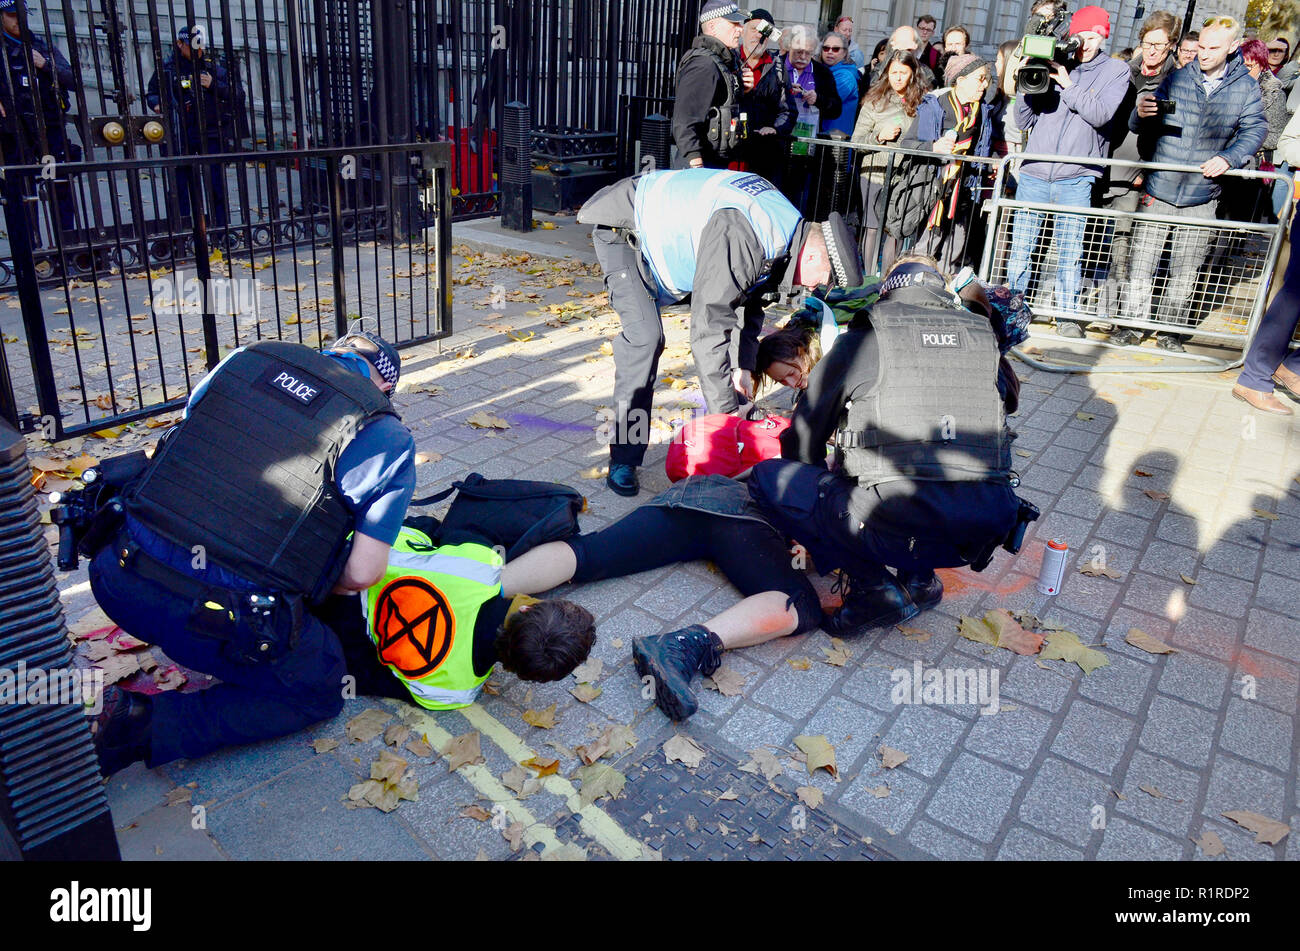 London, UK.  14th November. Several people are arrested as Environmental campaigners protest at the gates of Downing Street before a crucial cabinet meeting to discuss Brexit Credit: PjrFoto/Alamy Live News Stock Photo